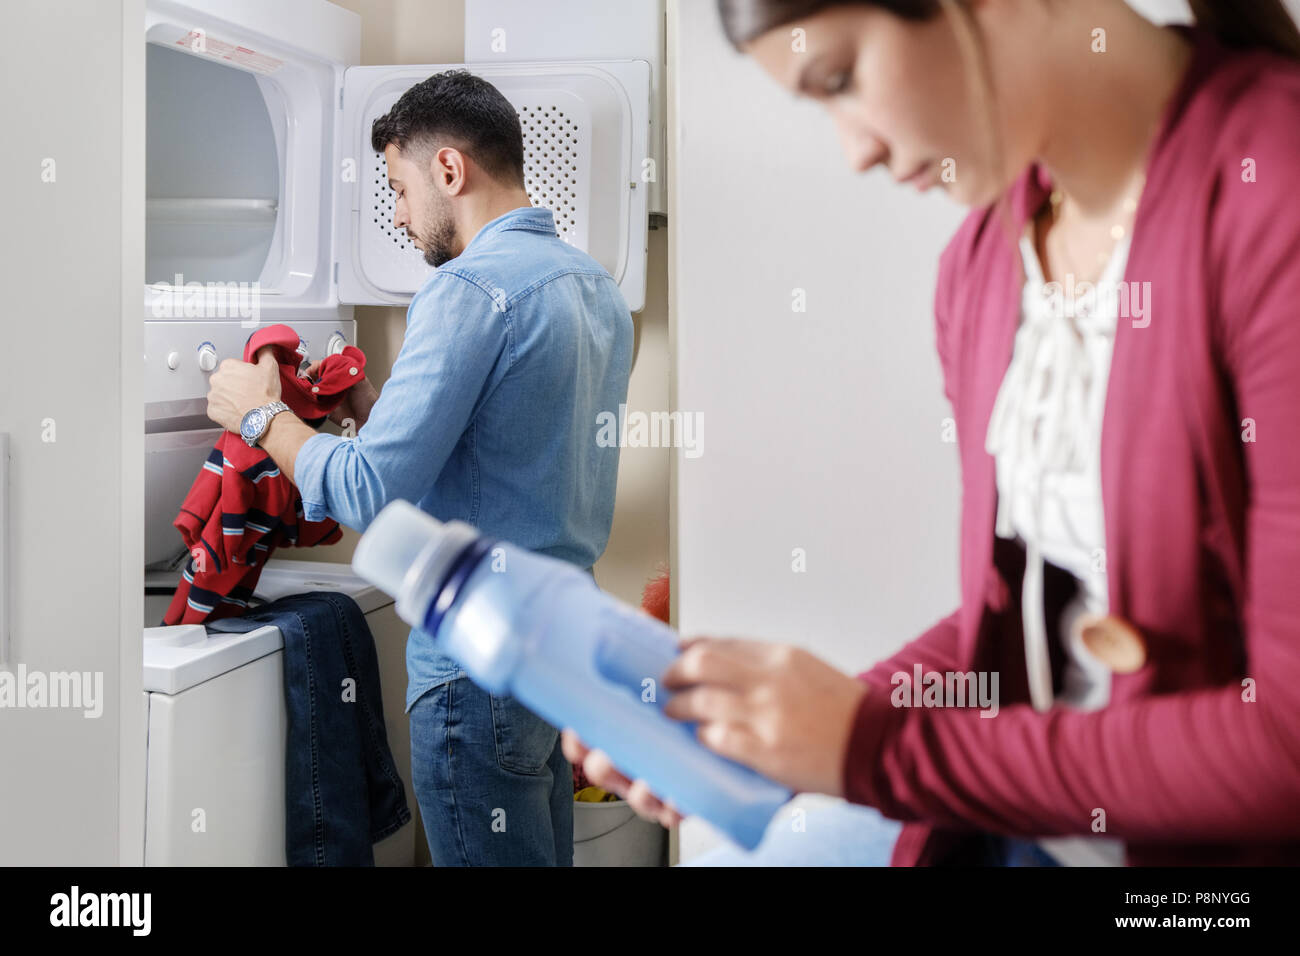 Man And Woman Doing Chores Washing Clothes Stock Photo